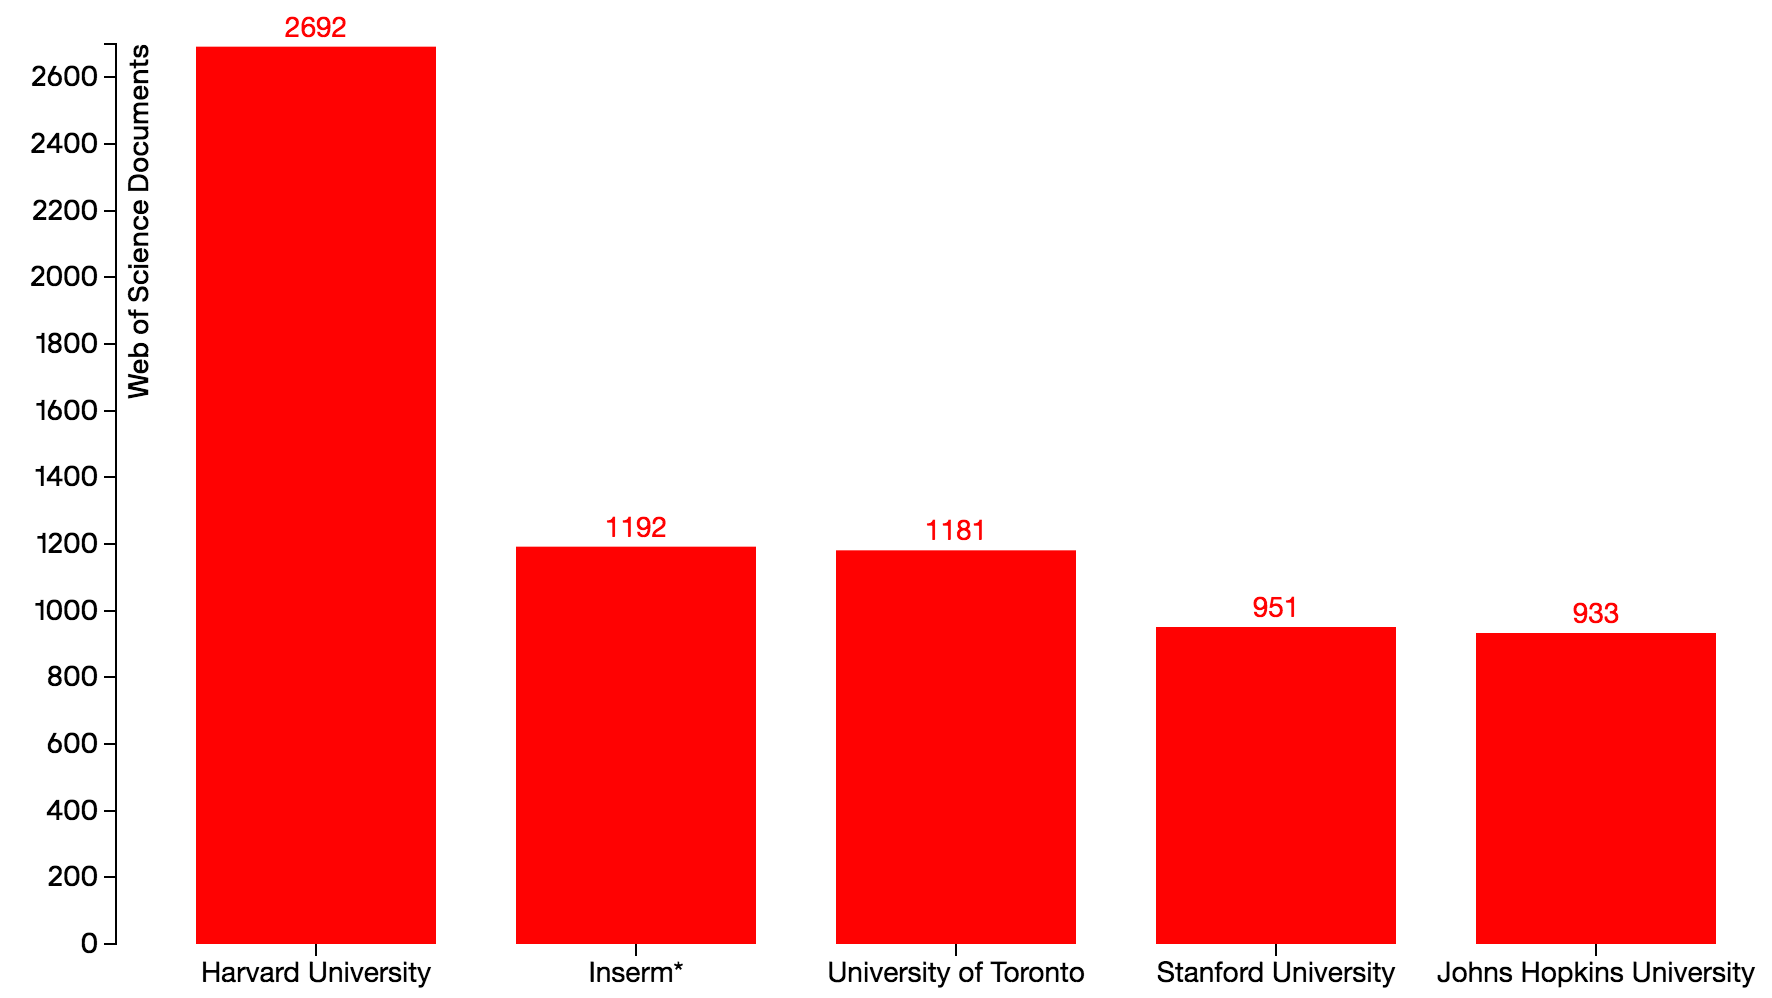 Number of Articles in Top Journals, 2015 World Top 5 Organizations: Harvard, Inserm, U of T, Stanford, Johns Hopkins